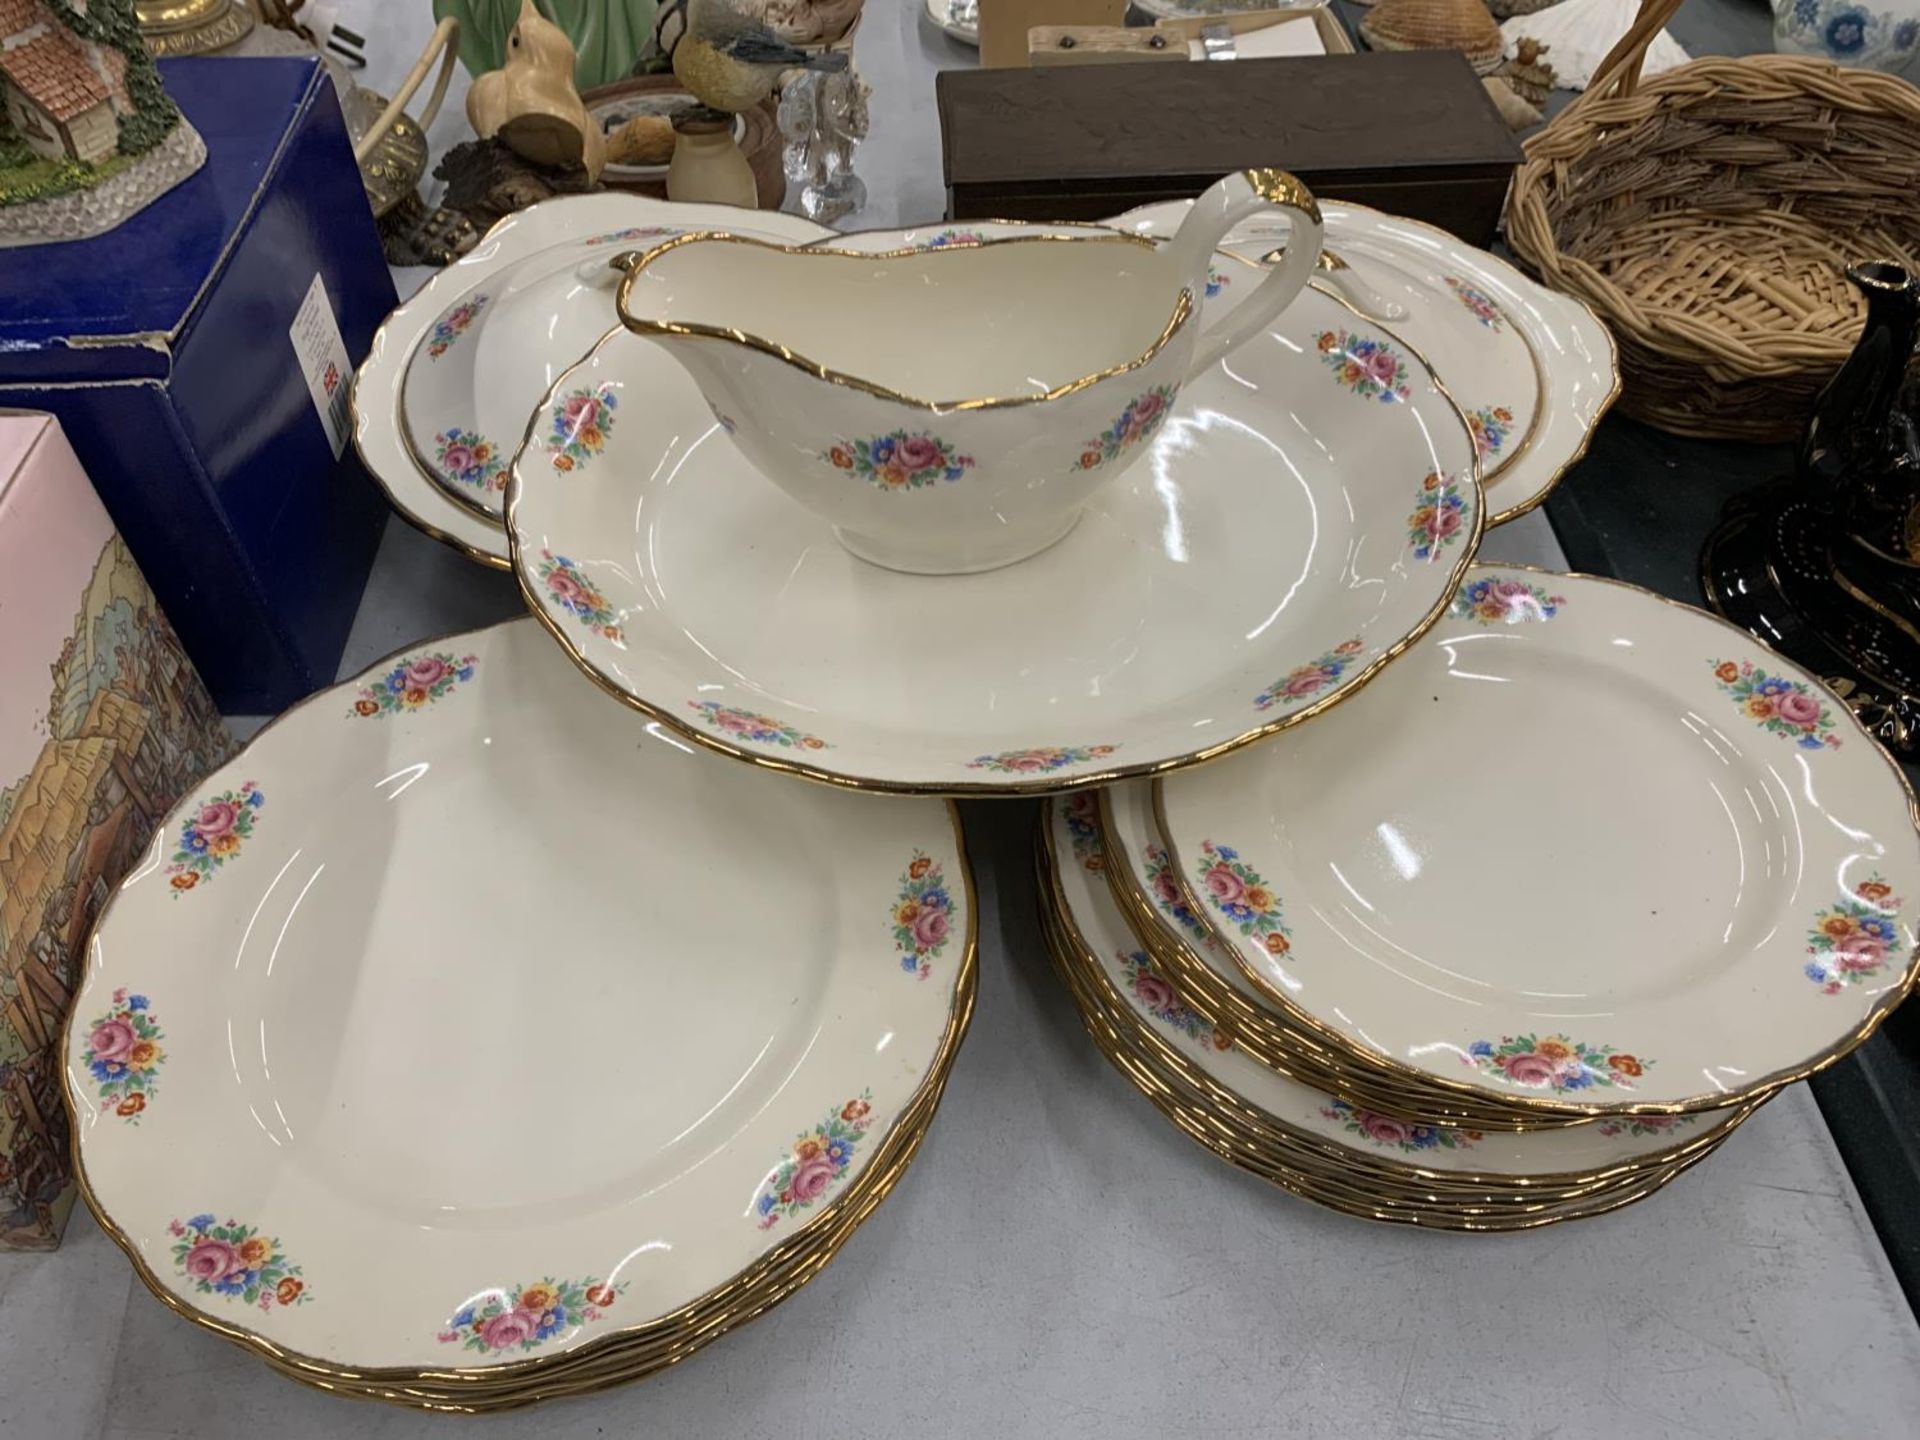 A QUANTITY OF VINTAGE GRINDLEY 'CREAM PETAL DINNERWARE TO INCLUDE SERVING TUREENS, VARIOUS SIZES - Image 3 of 4